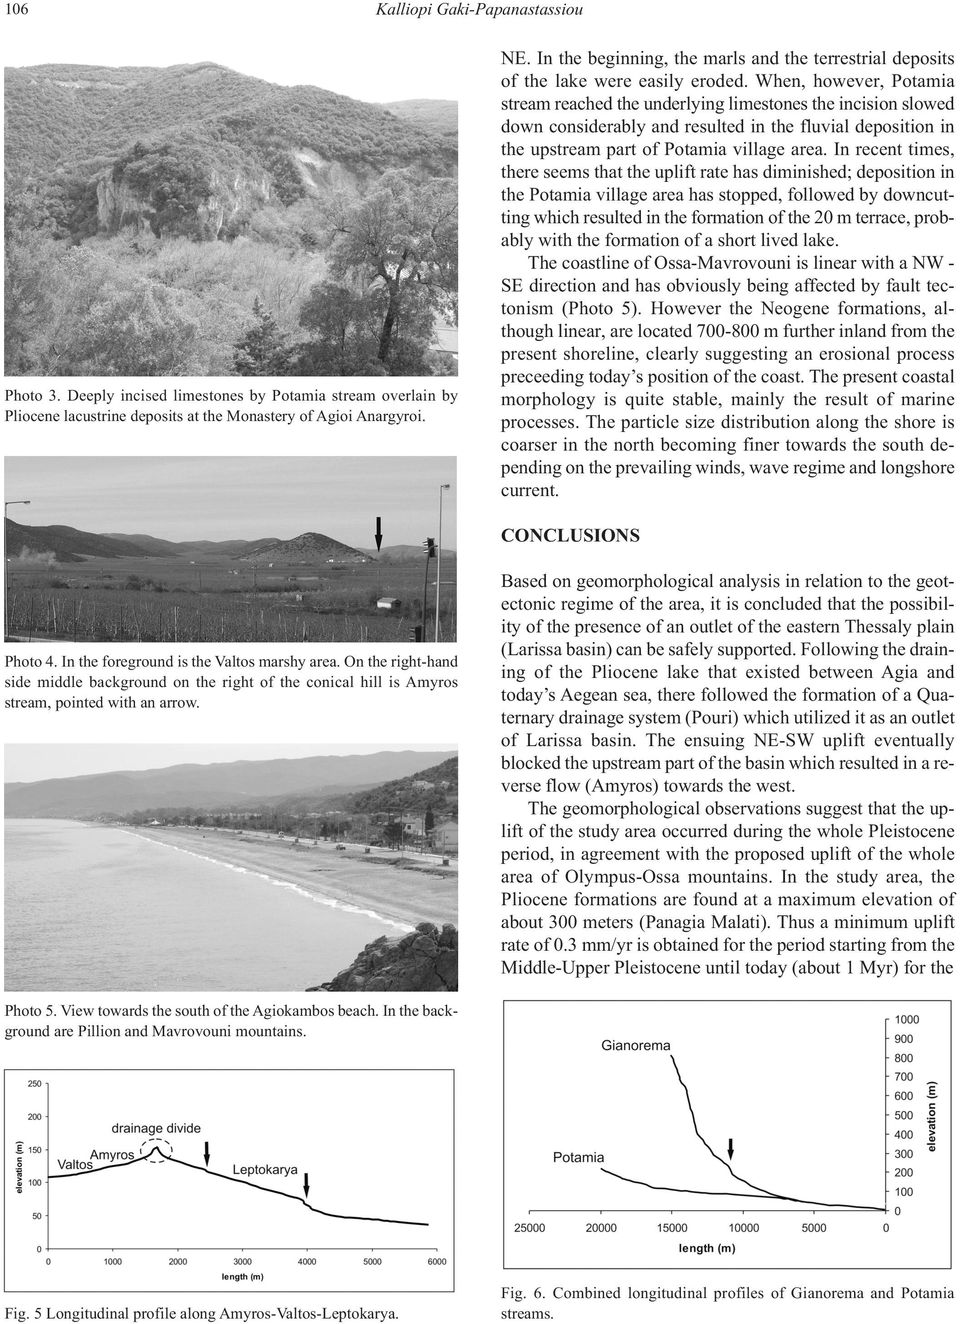 When, however, Potamia stream reached the underlying limestones the incision slowed down considerably and resulted in the fluvial deposition in the upstream part of Potamia village area.